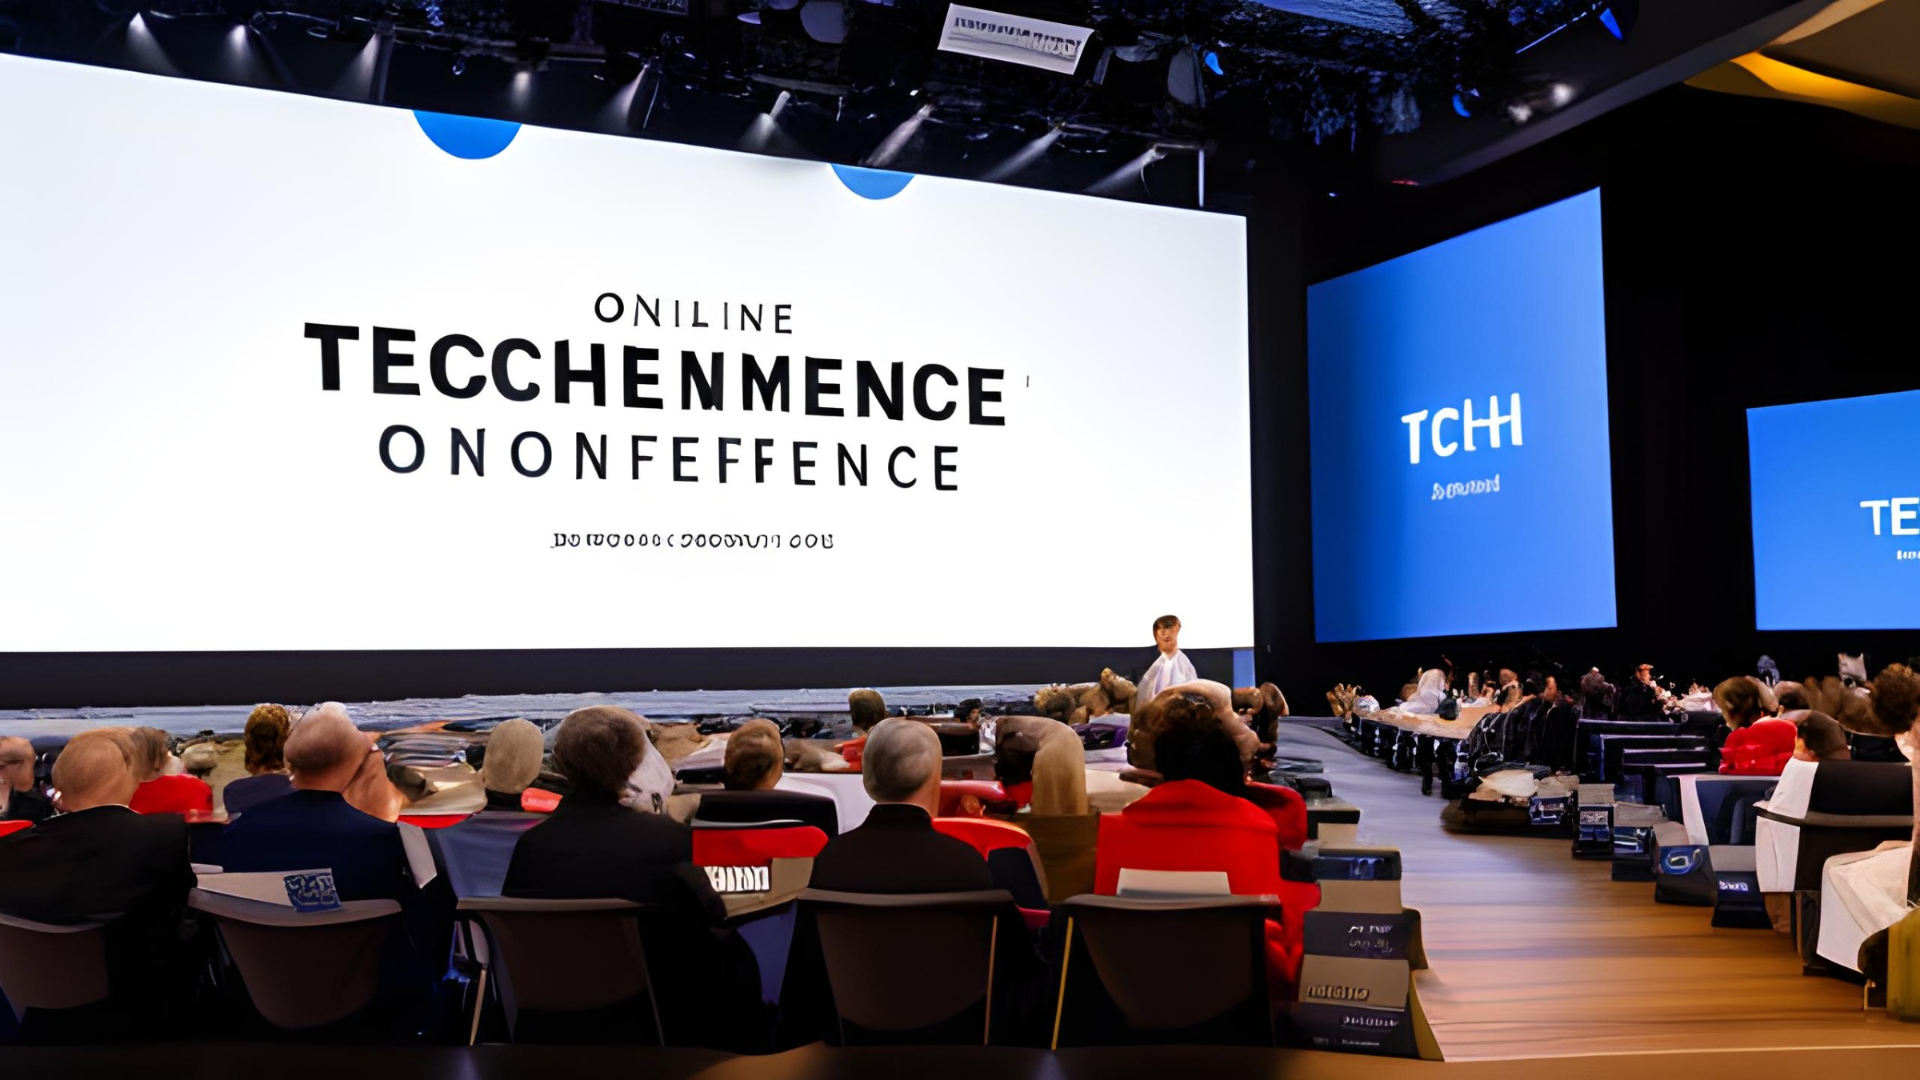 An online tech conference